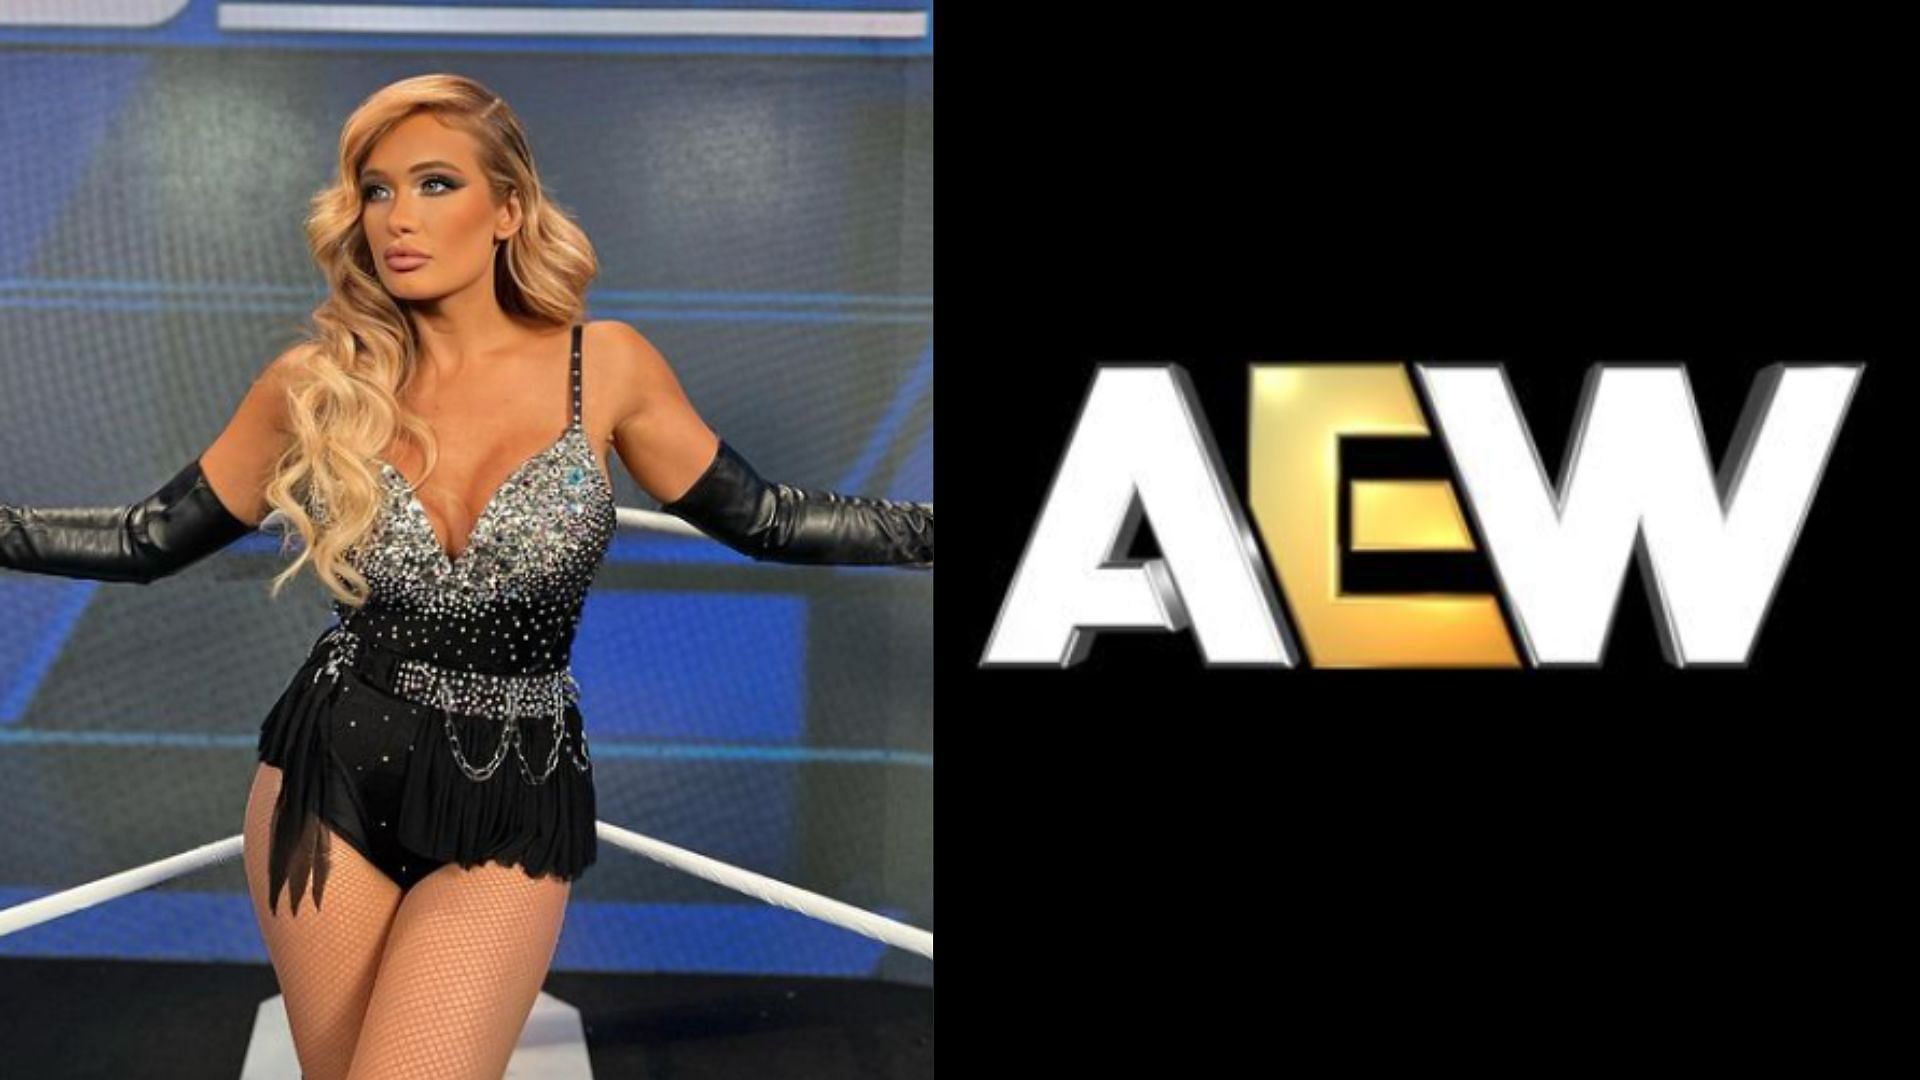 Scarlett Bordeaux is a WWE superstar and manager [Image Credits: AEW